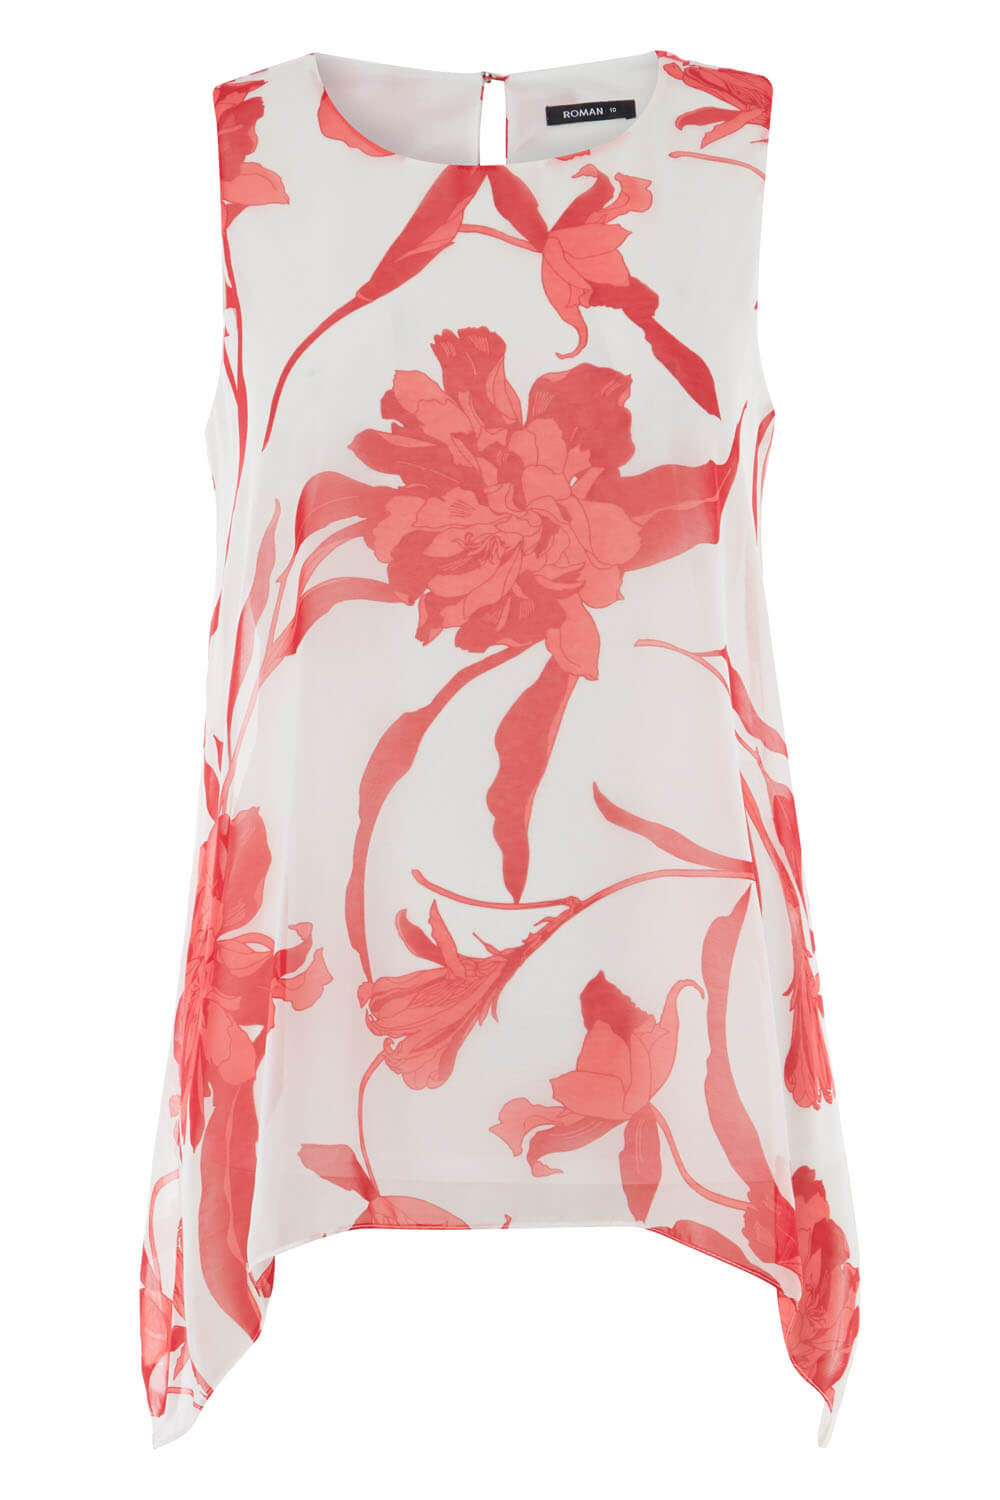 Red Floral Print Sleeveless Top, Image 3 of 4